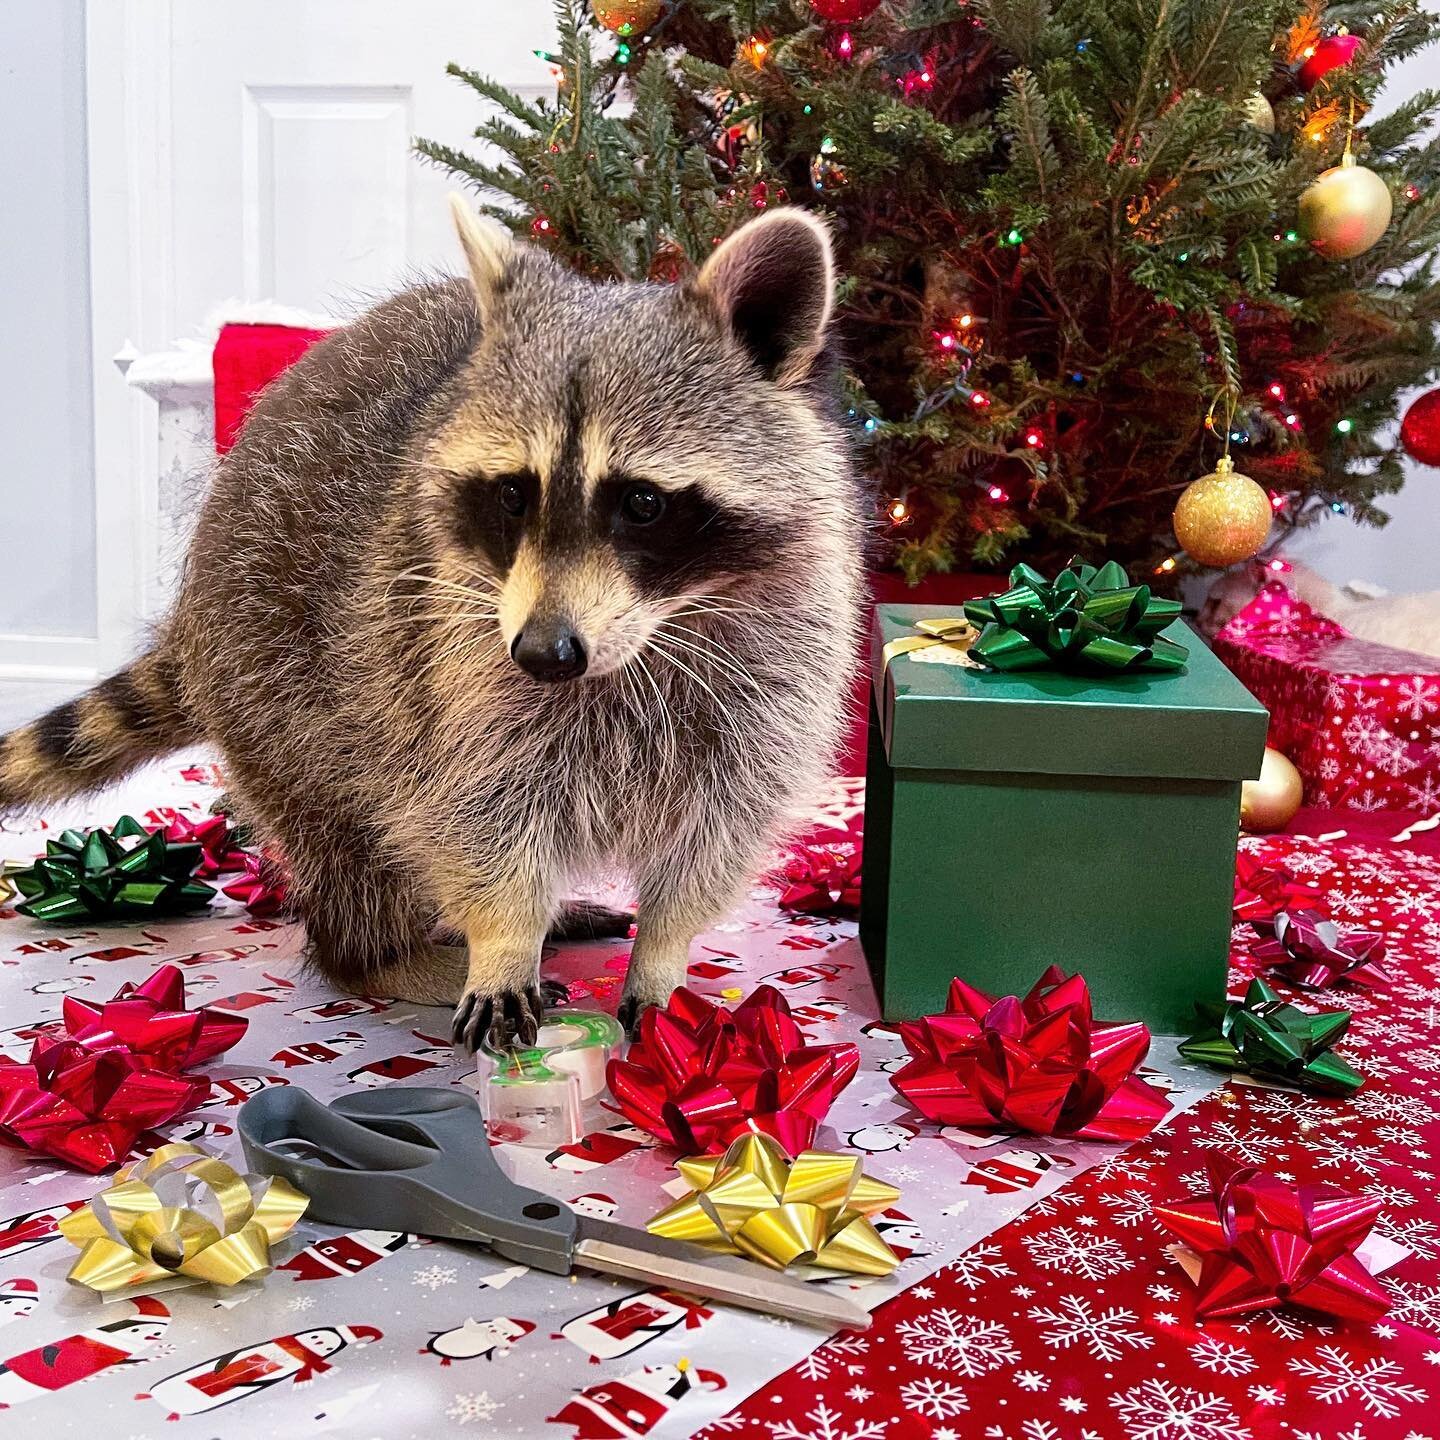 Can someone come help me wrap Piper&rsquo;s gift? I don&rsquo;t have thumbs🎄🎁 - Cheeto🦝

&bull;
&bull;
&bull;
&bull;
&bull;
#raccoon #raccoons #raccoonlife #raccooncafe #raccoonsofinstagram #raccoonbaby #babyraccoon #rocketraccoon #petraccoon #rac